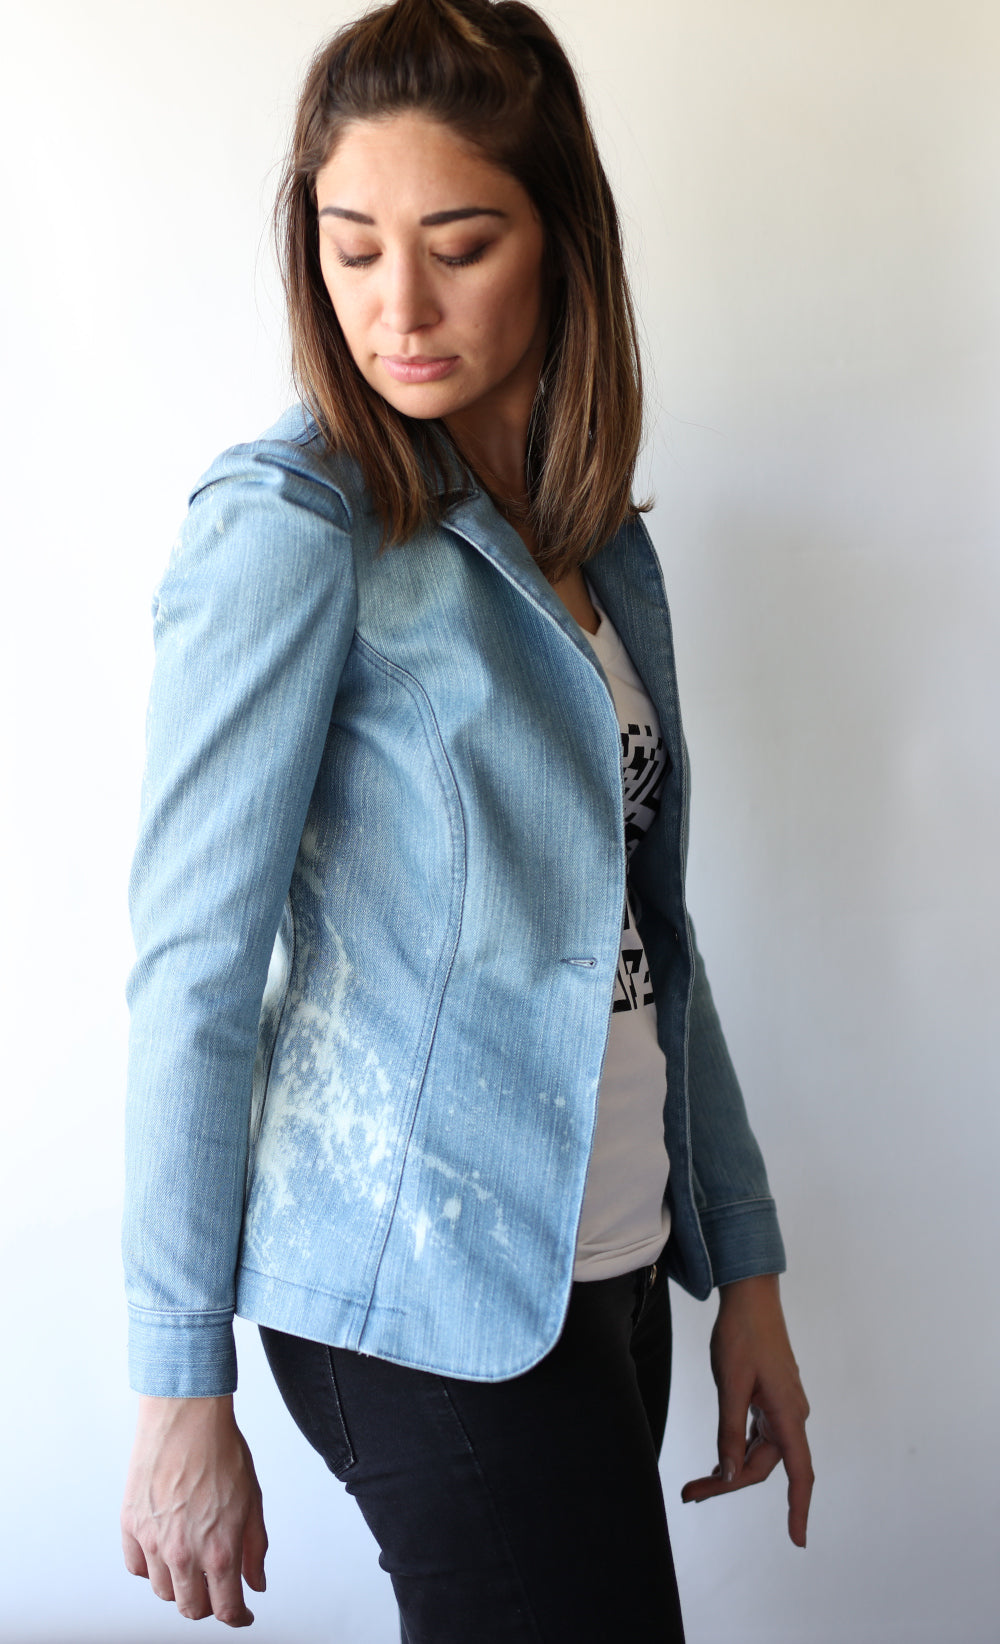 Haute Couture One of a Kind Up-cycled New Jacket "Vegan Rebel" Collab & Design by Jarod-Pi